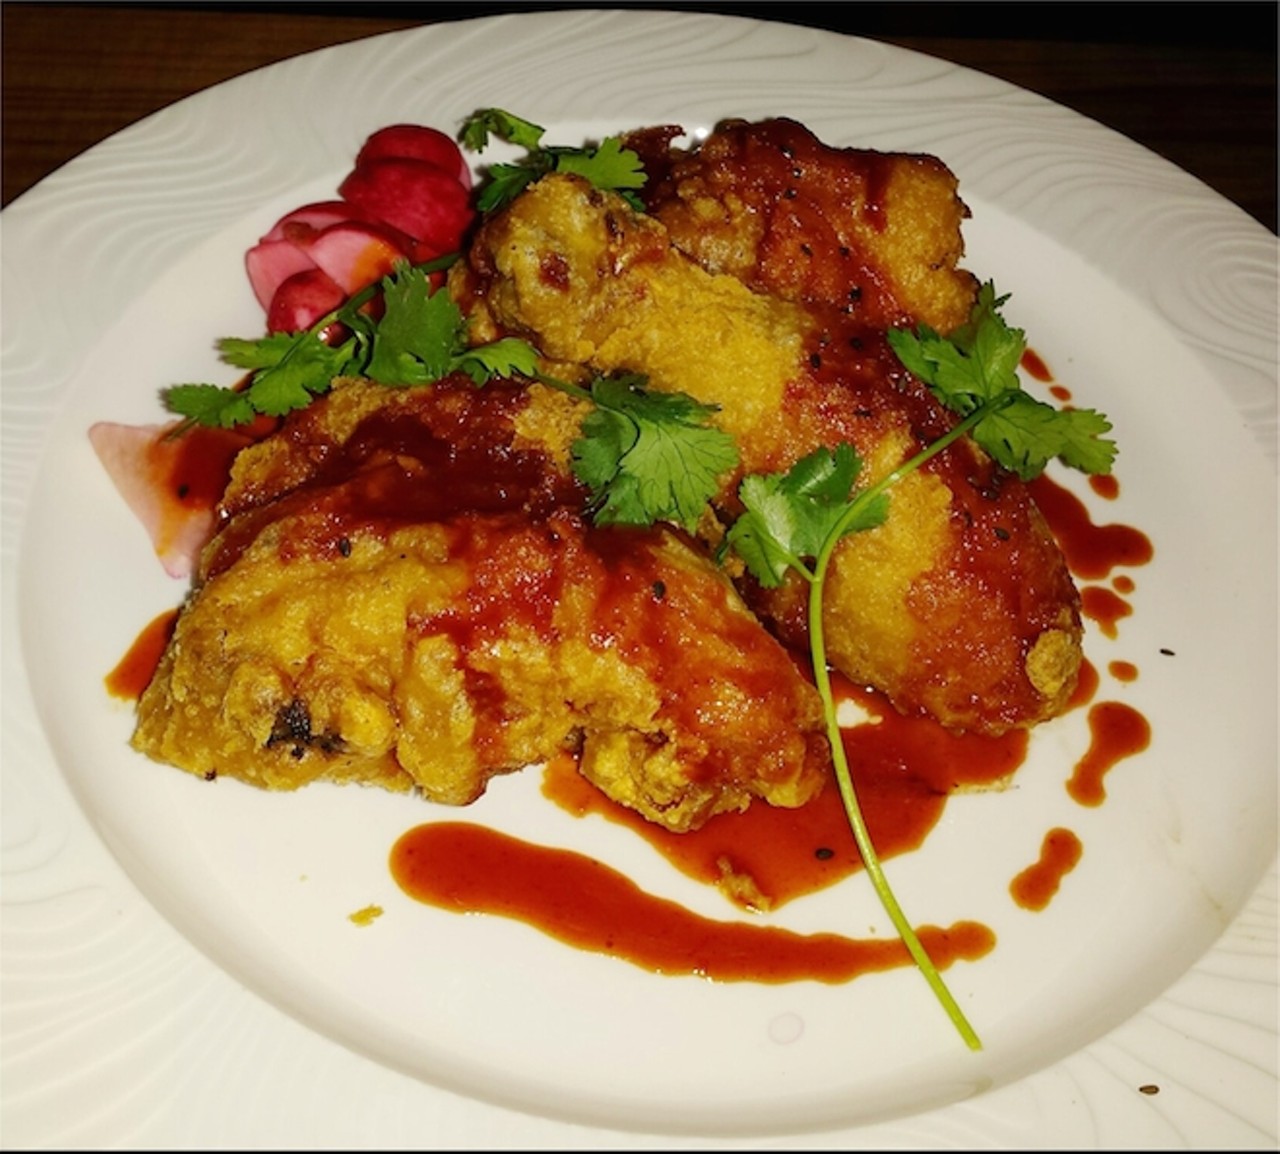 Lake Meadow Naturals Korean-Style Fried Chicken
(Pickled Radishes, Sweet and Spicy Sauce)